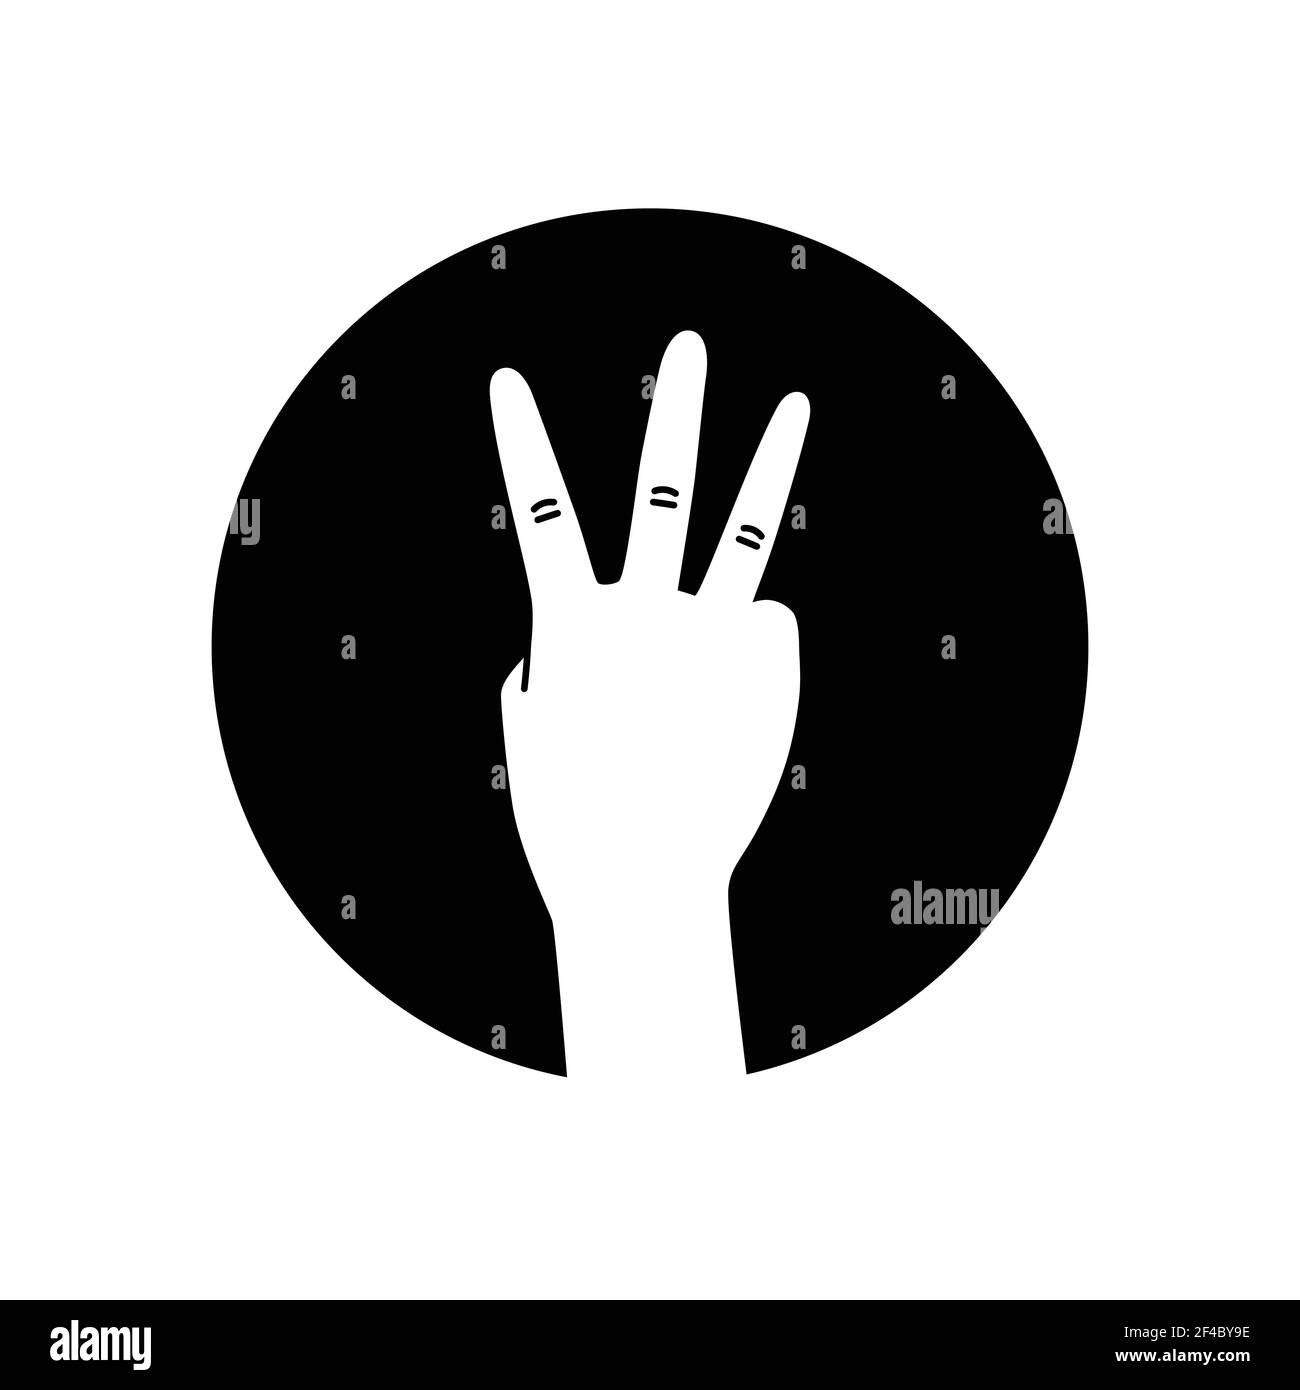 Three fingers gesture glyph black icon. Make fingers up gesture sketch element. Pictogram for web page, mobile app, promo. Editable stroke. Hand drawn Stock Vector